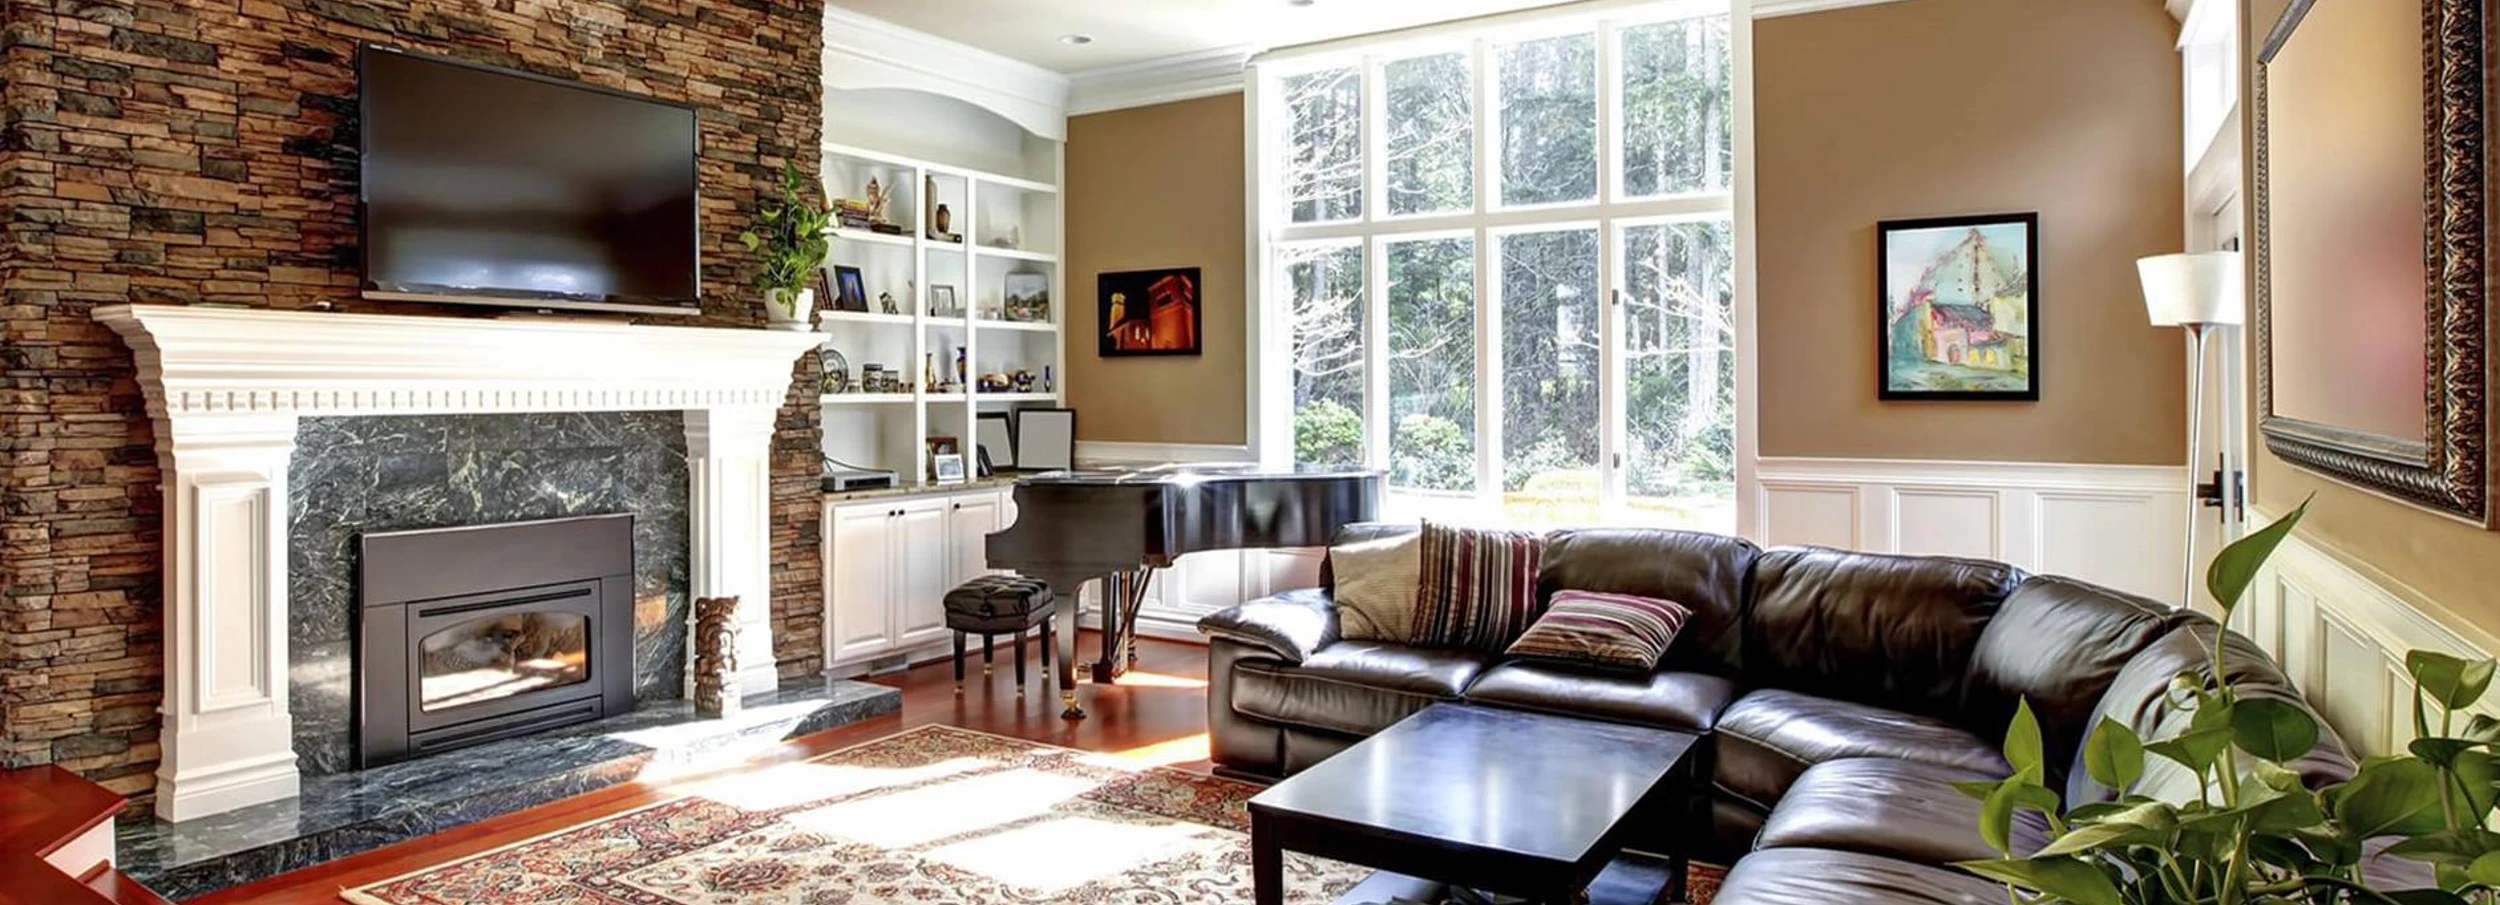 Living room with leather couch and fireplace - big window looks out to trees